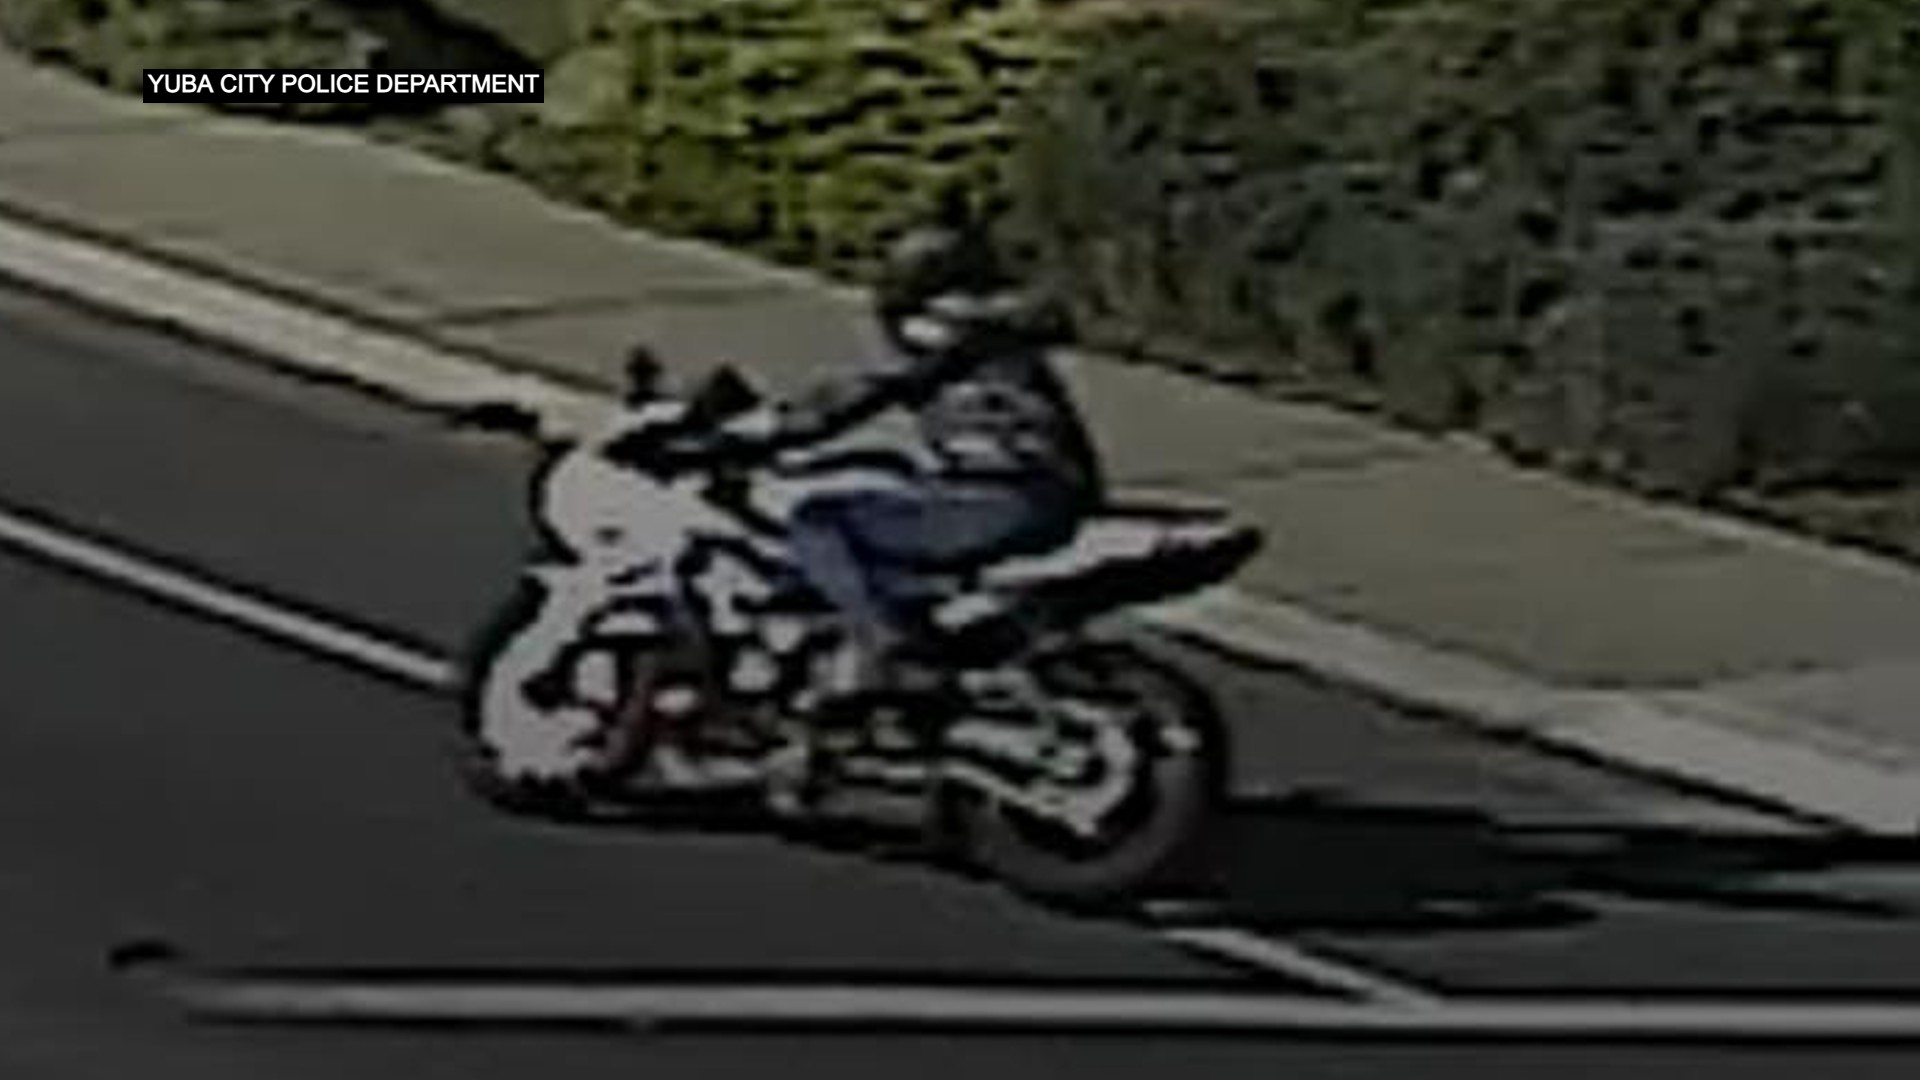 Search On For Motorcyclist Seen Speeding Around Yuba City, Taunting Officers